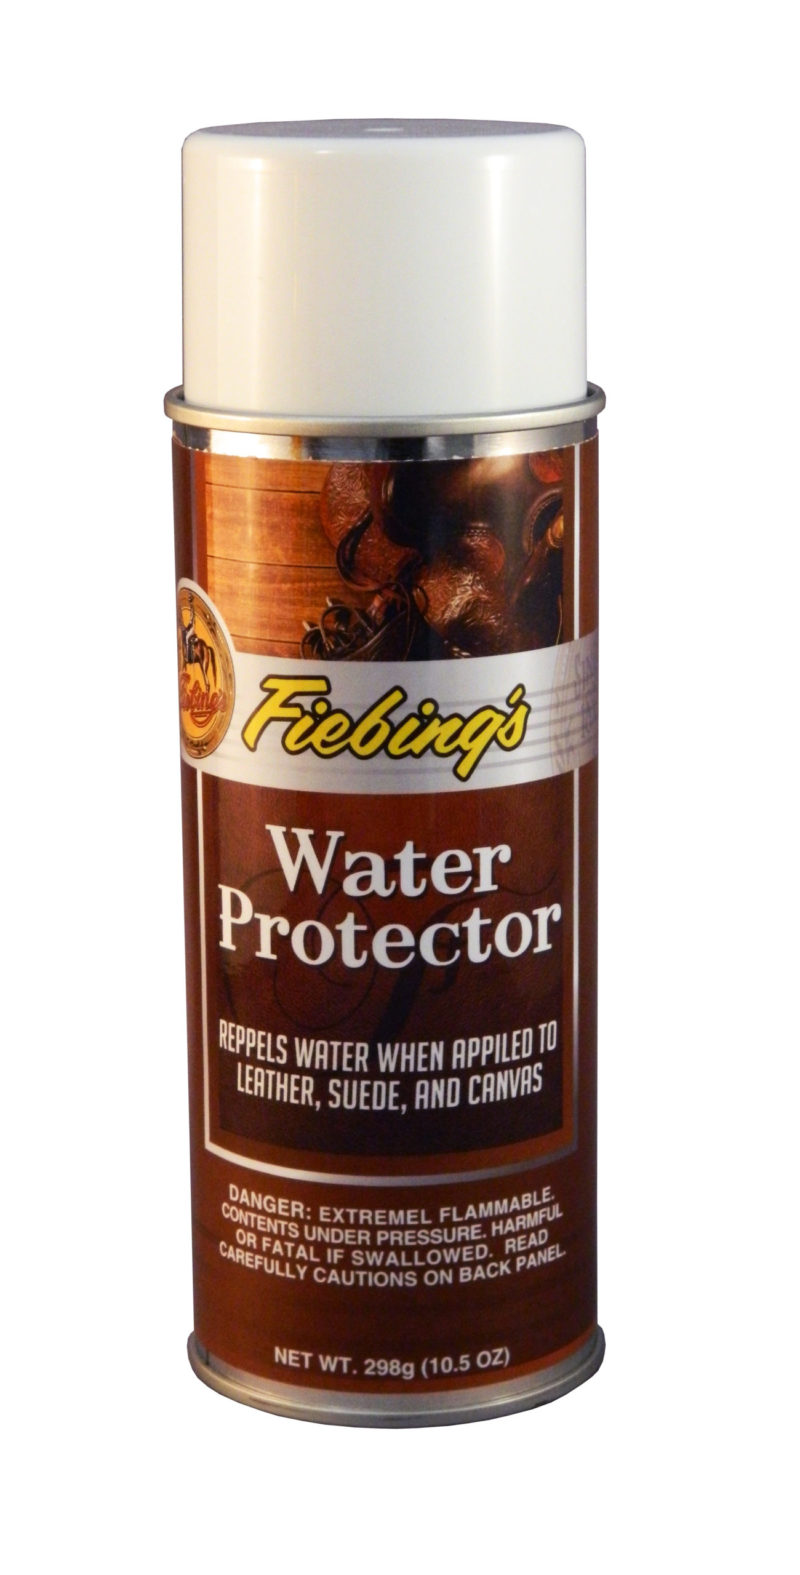 Fiebing's Leather Care, Leather Protector, Water Repellent, Suede Protector